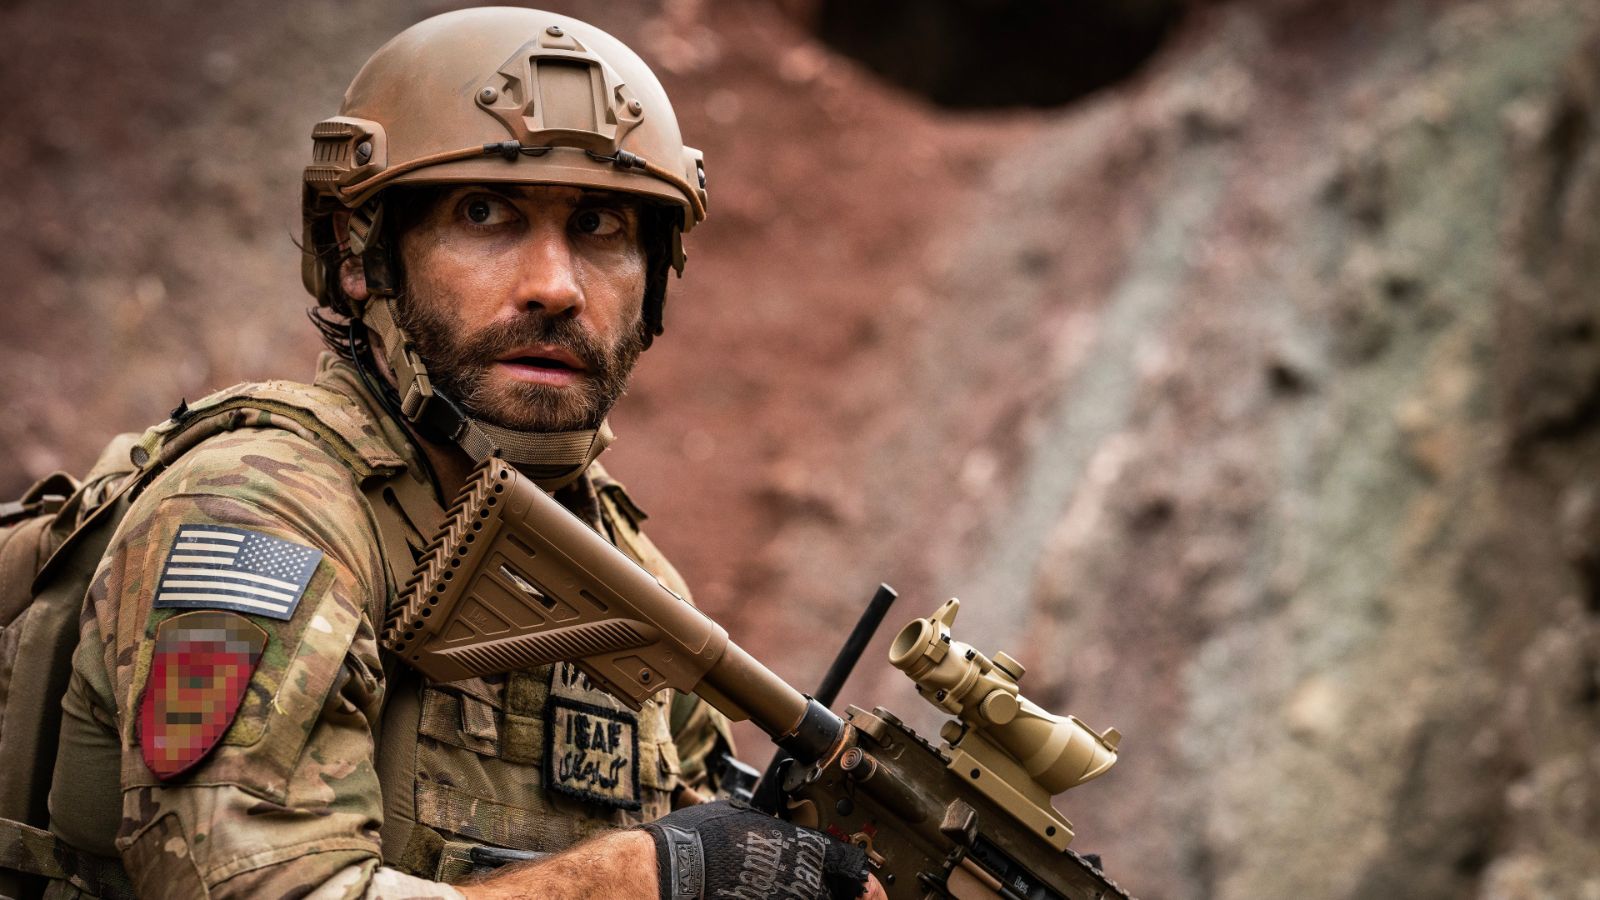 Jake Gyllenhaal and Dar Salim on Guy Ritchie’s The Covenant and Learning from Jarhead